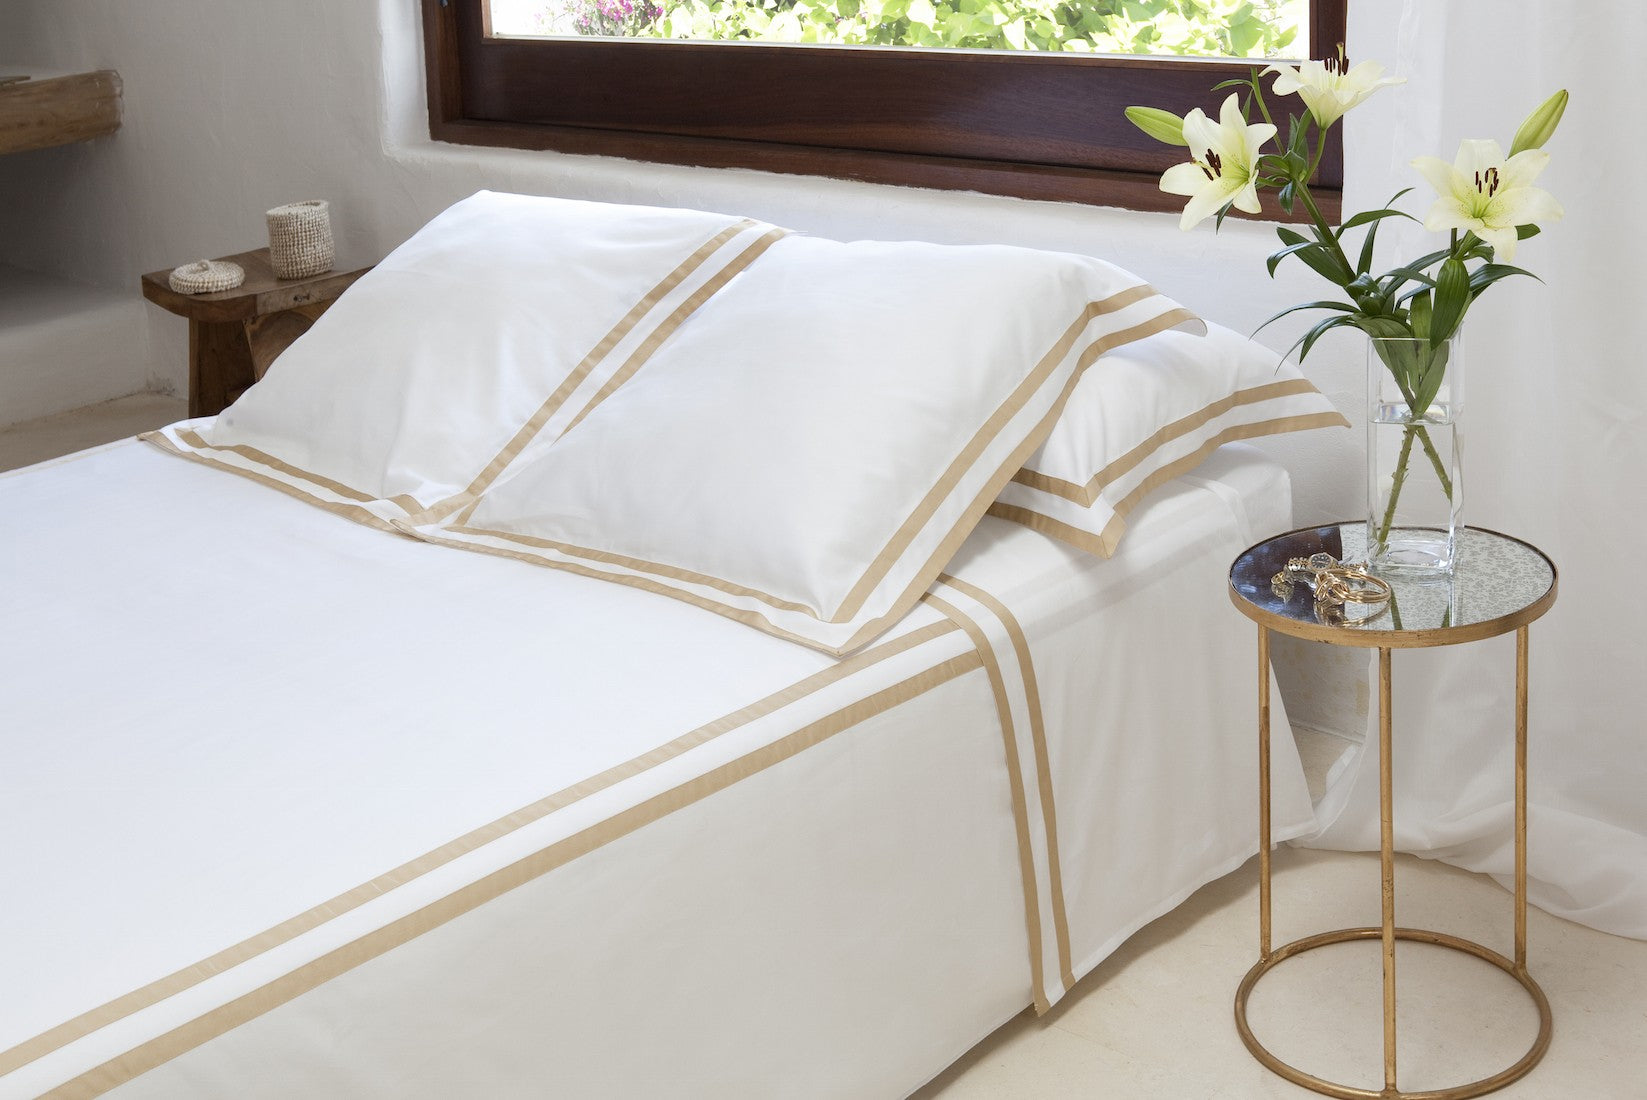 Euro King Fitted Sheet Formentera